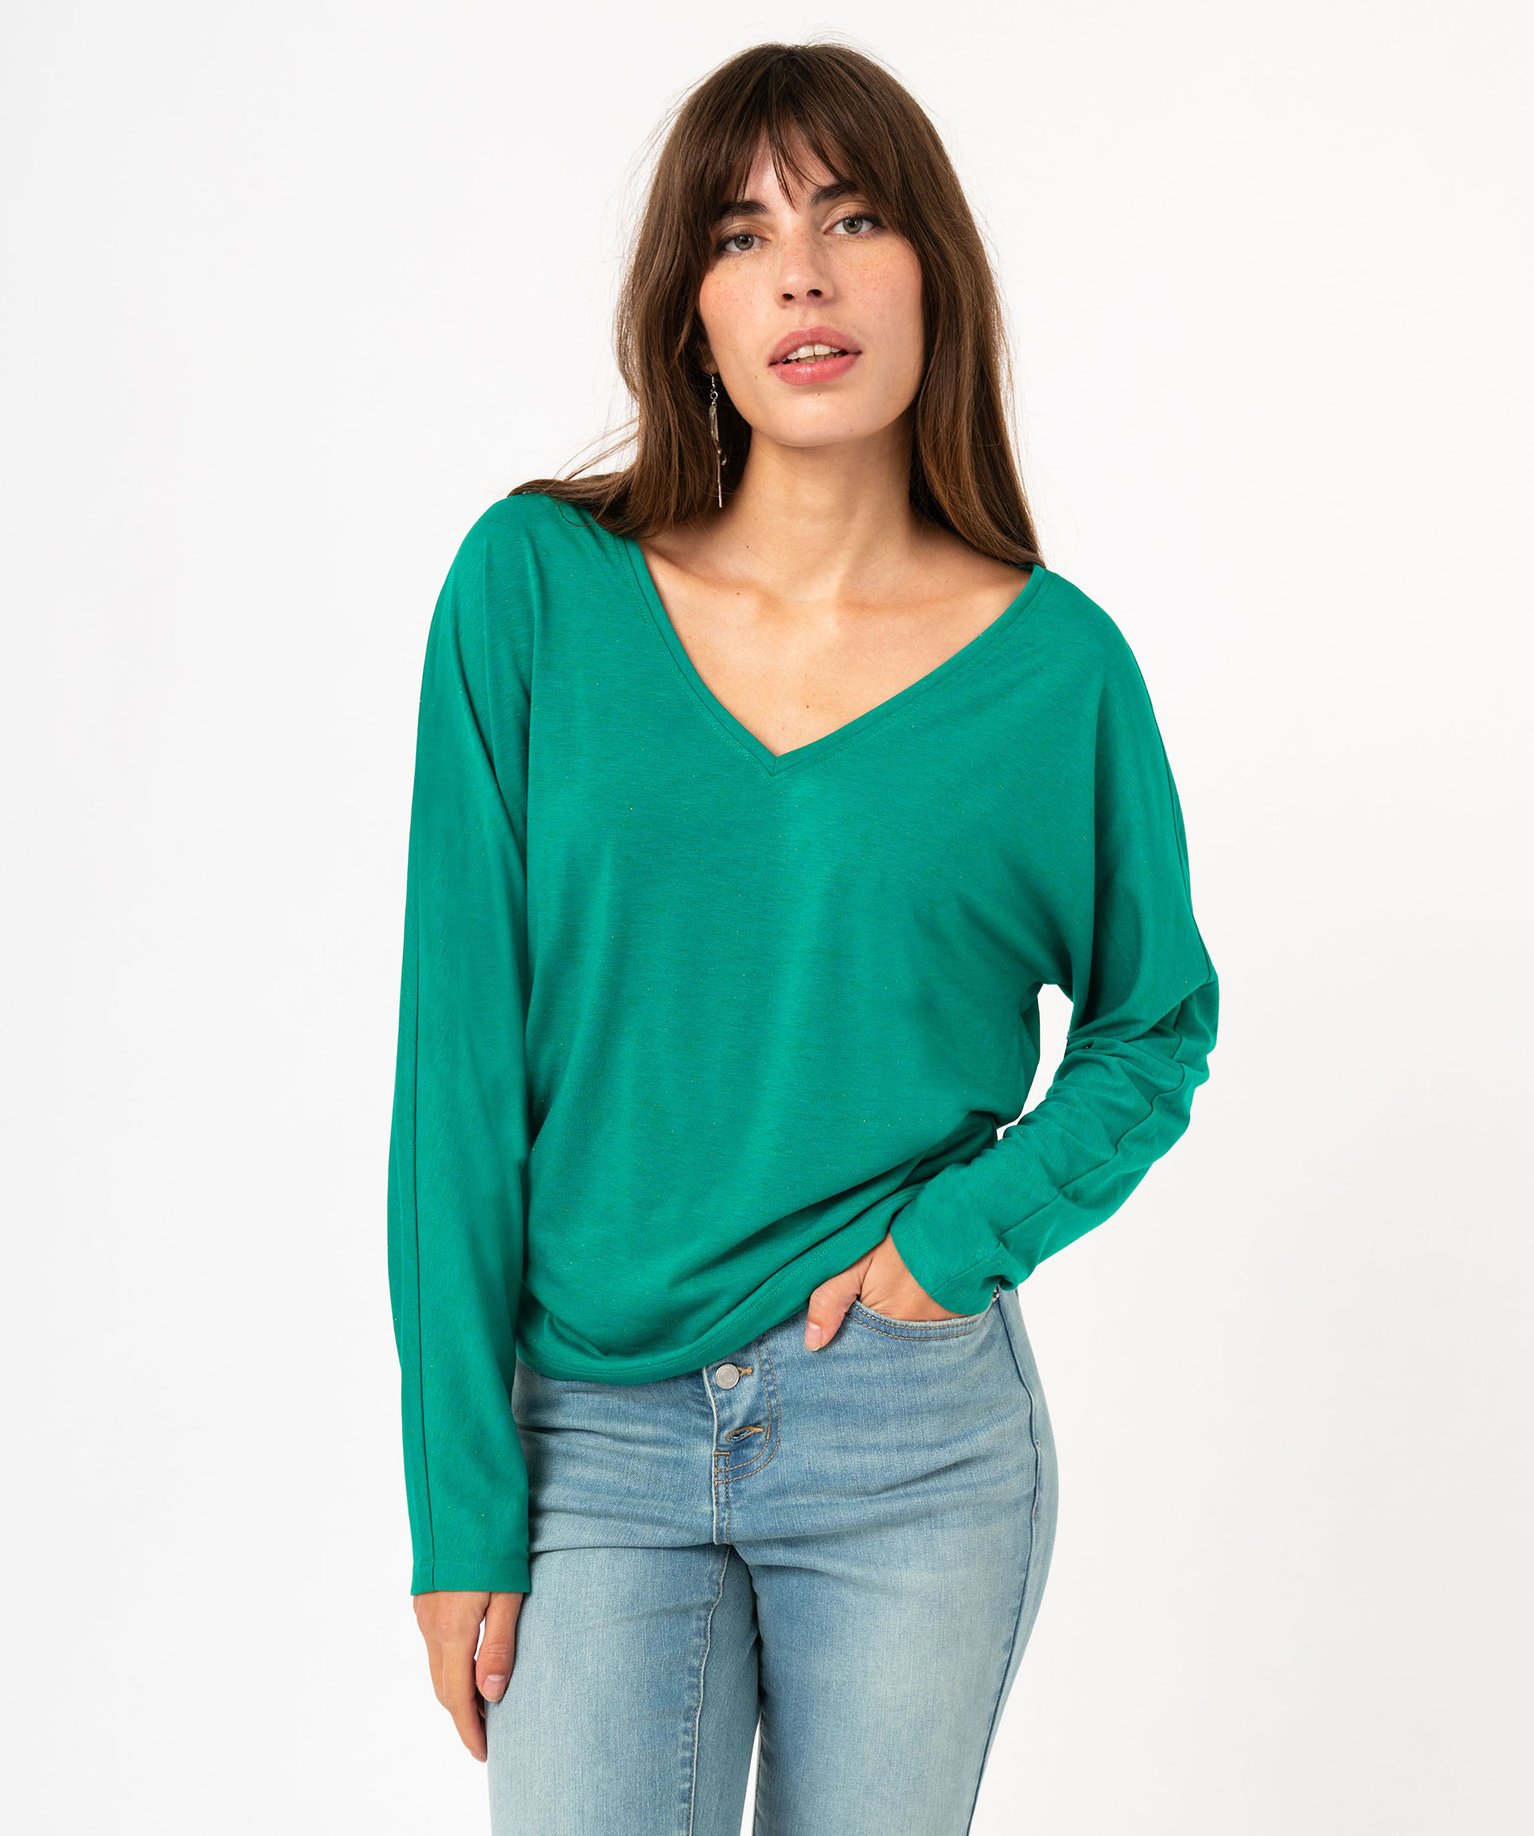 tee-shirt a manches longues a double col v femme vert t-shirts manches longues